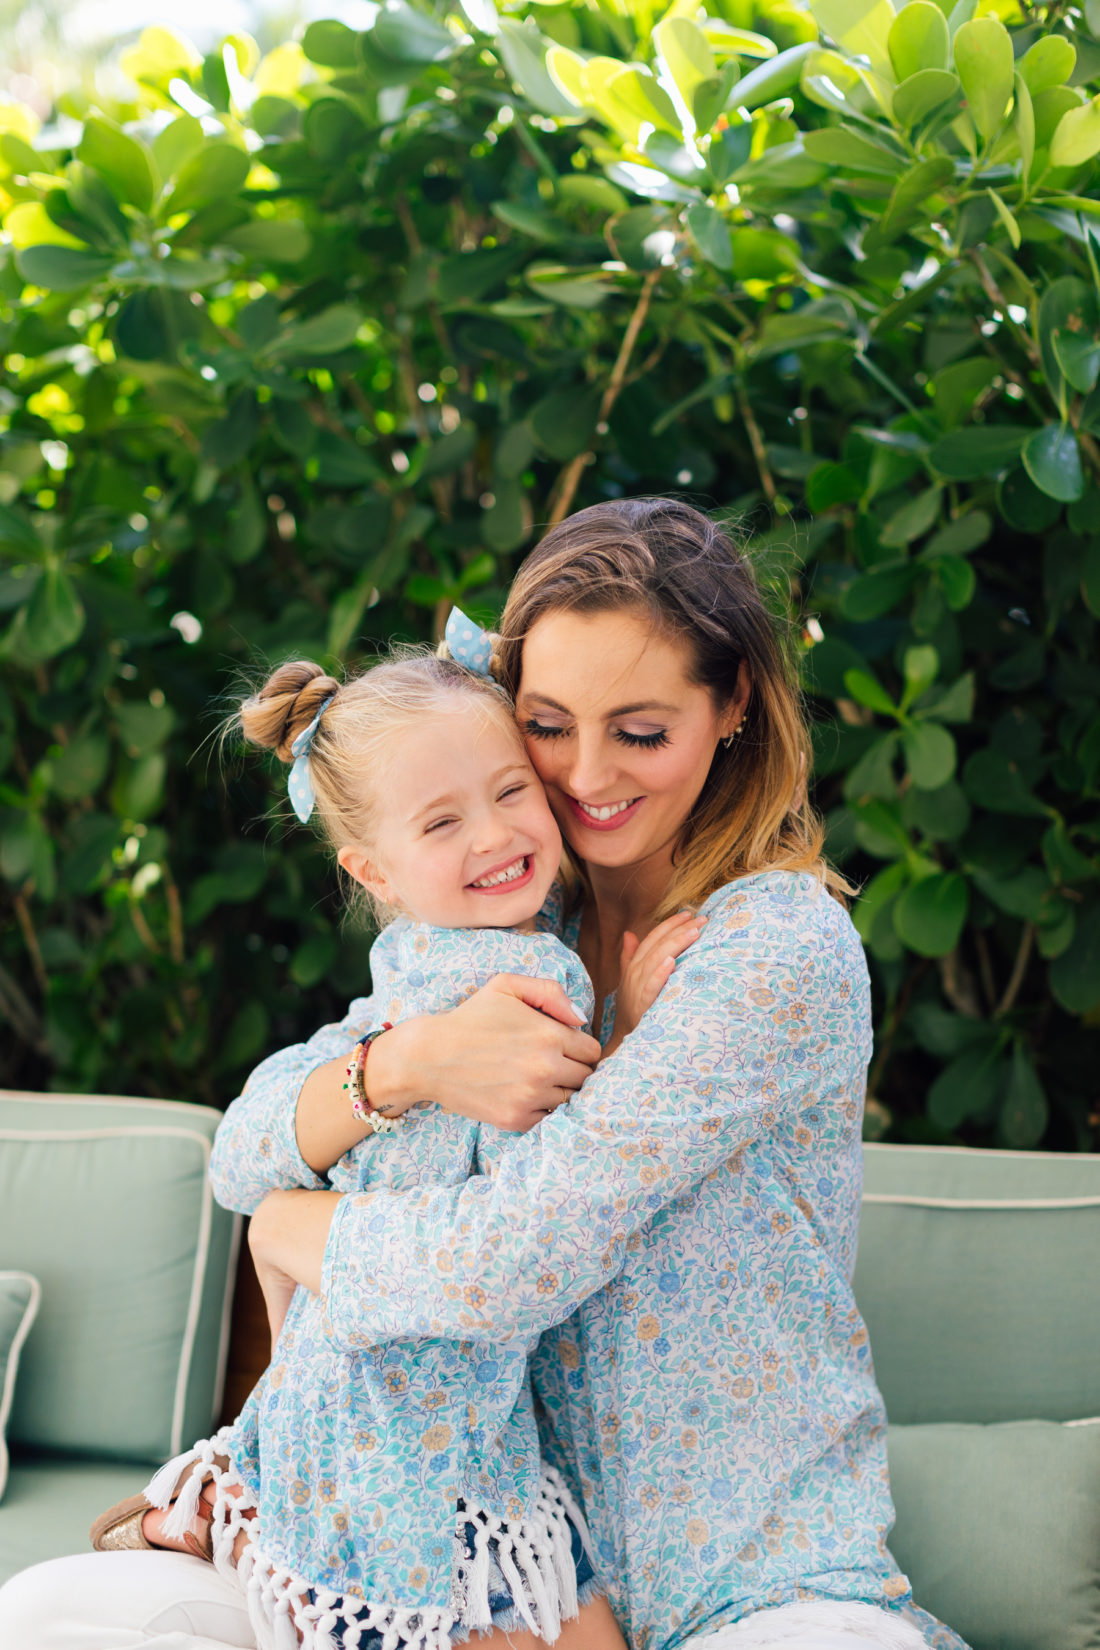 Eva Amurri Martino and Marlowe Martino wear matching masala baby tunics in a blue floral print from their limited capsule collection for the brand. 